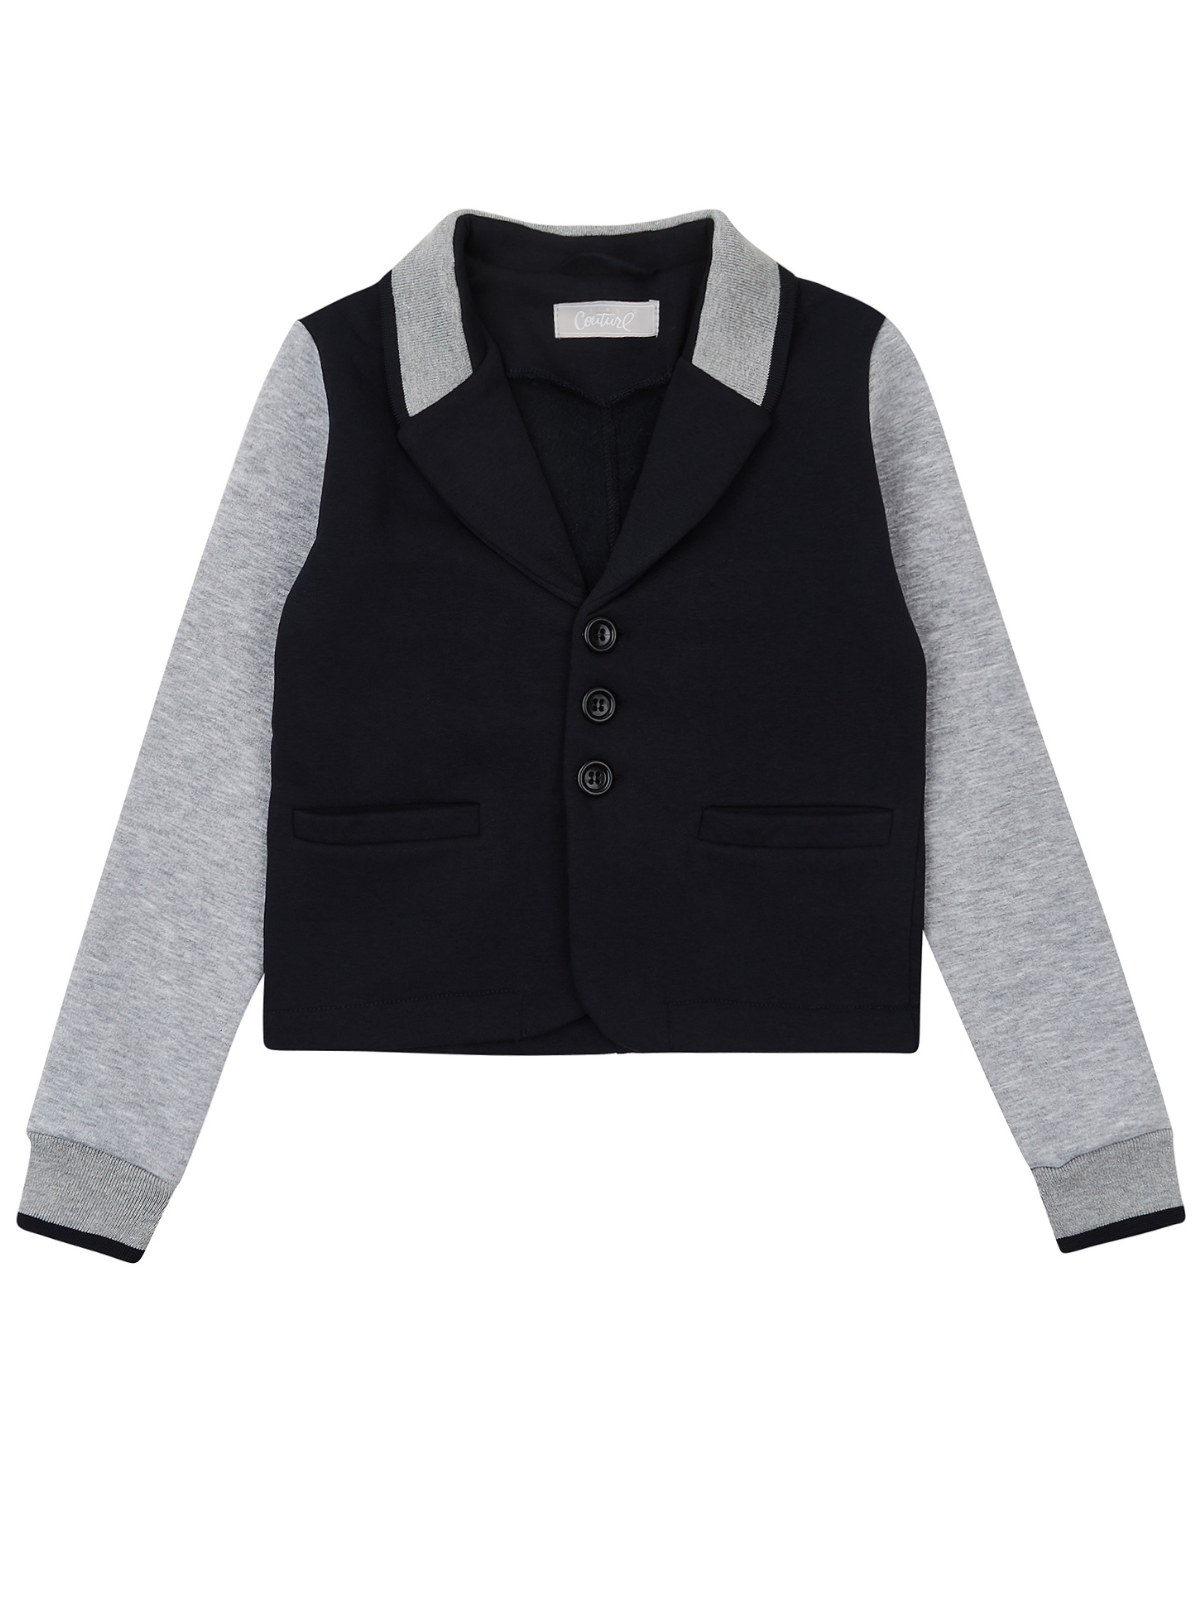 Boys Back-to-School Blazer Jacket by Kids Couture